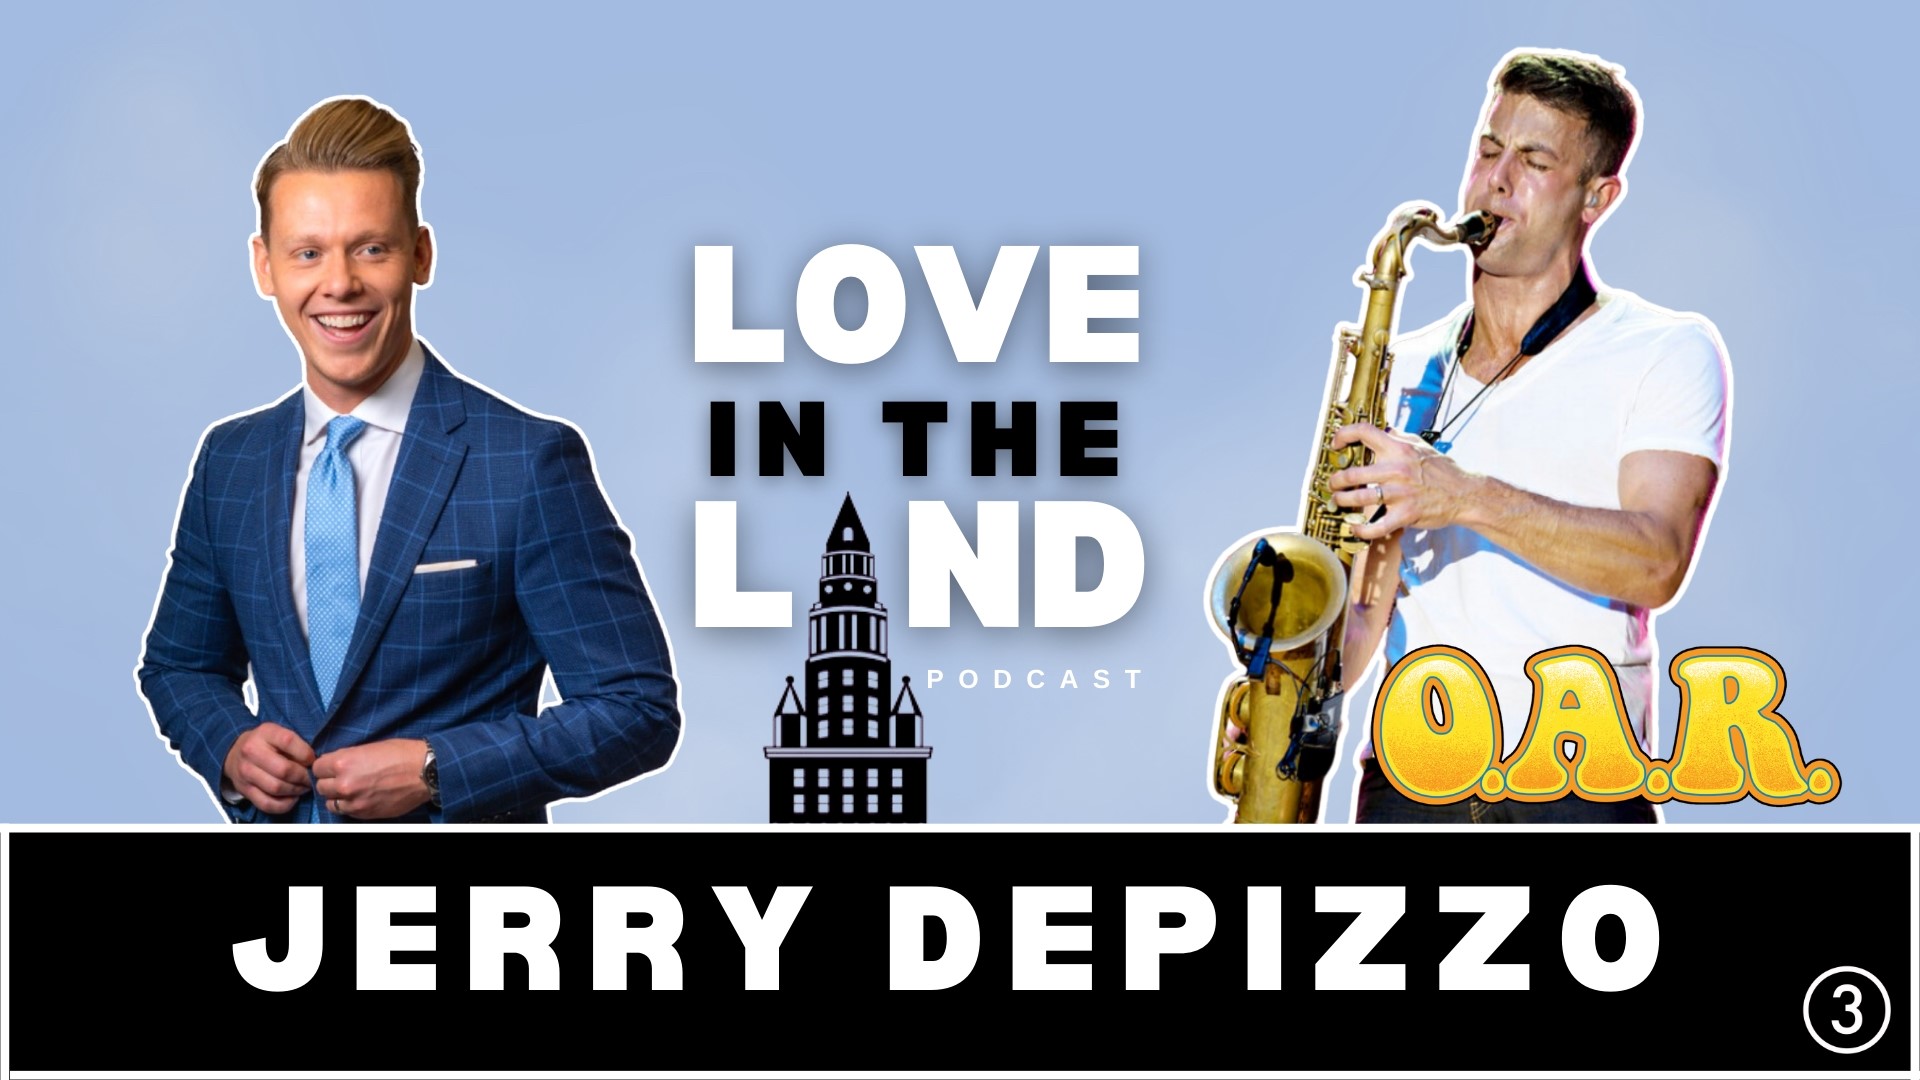 In this episode of 'Love in the Land,' 3News' Austin Love welcomes Jerry DePizzo of O.A.R. for an in-depth conversatino about his journey into music and lots more.